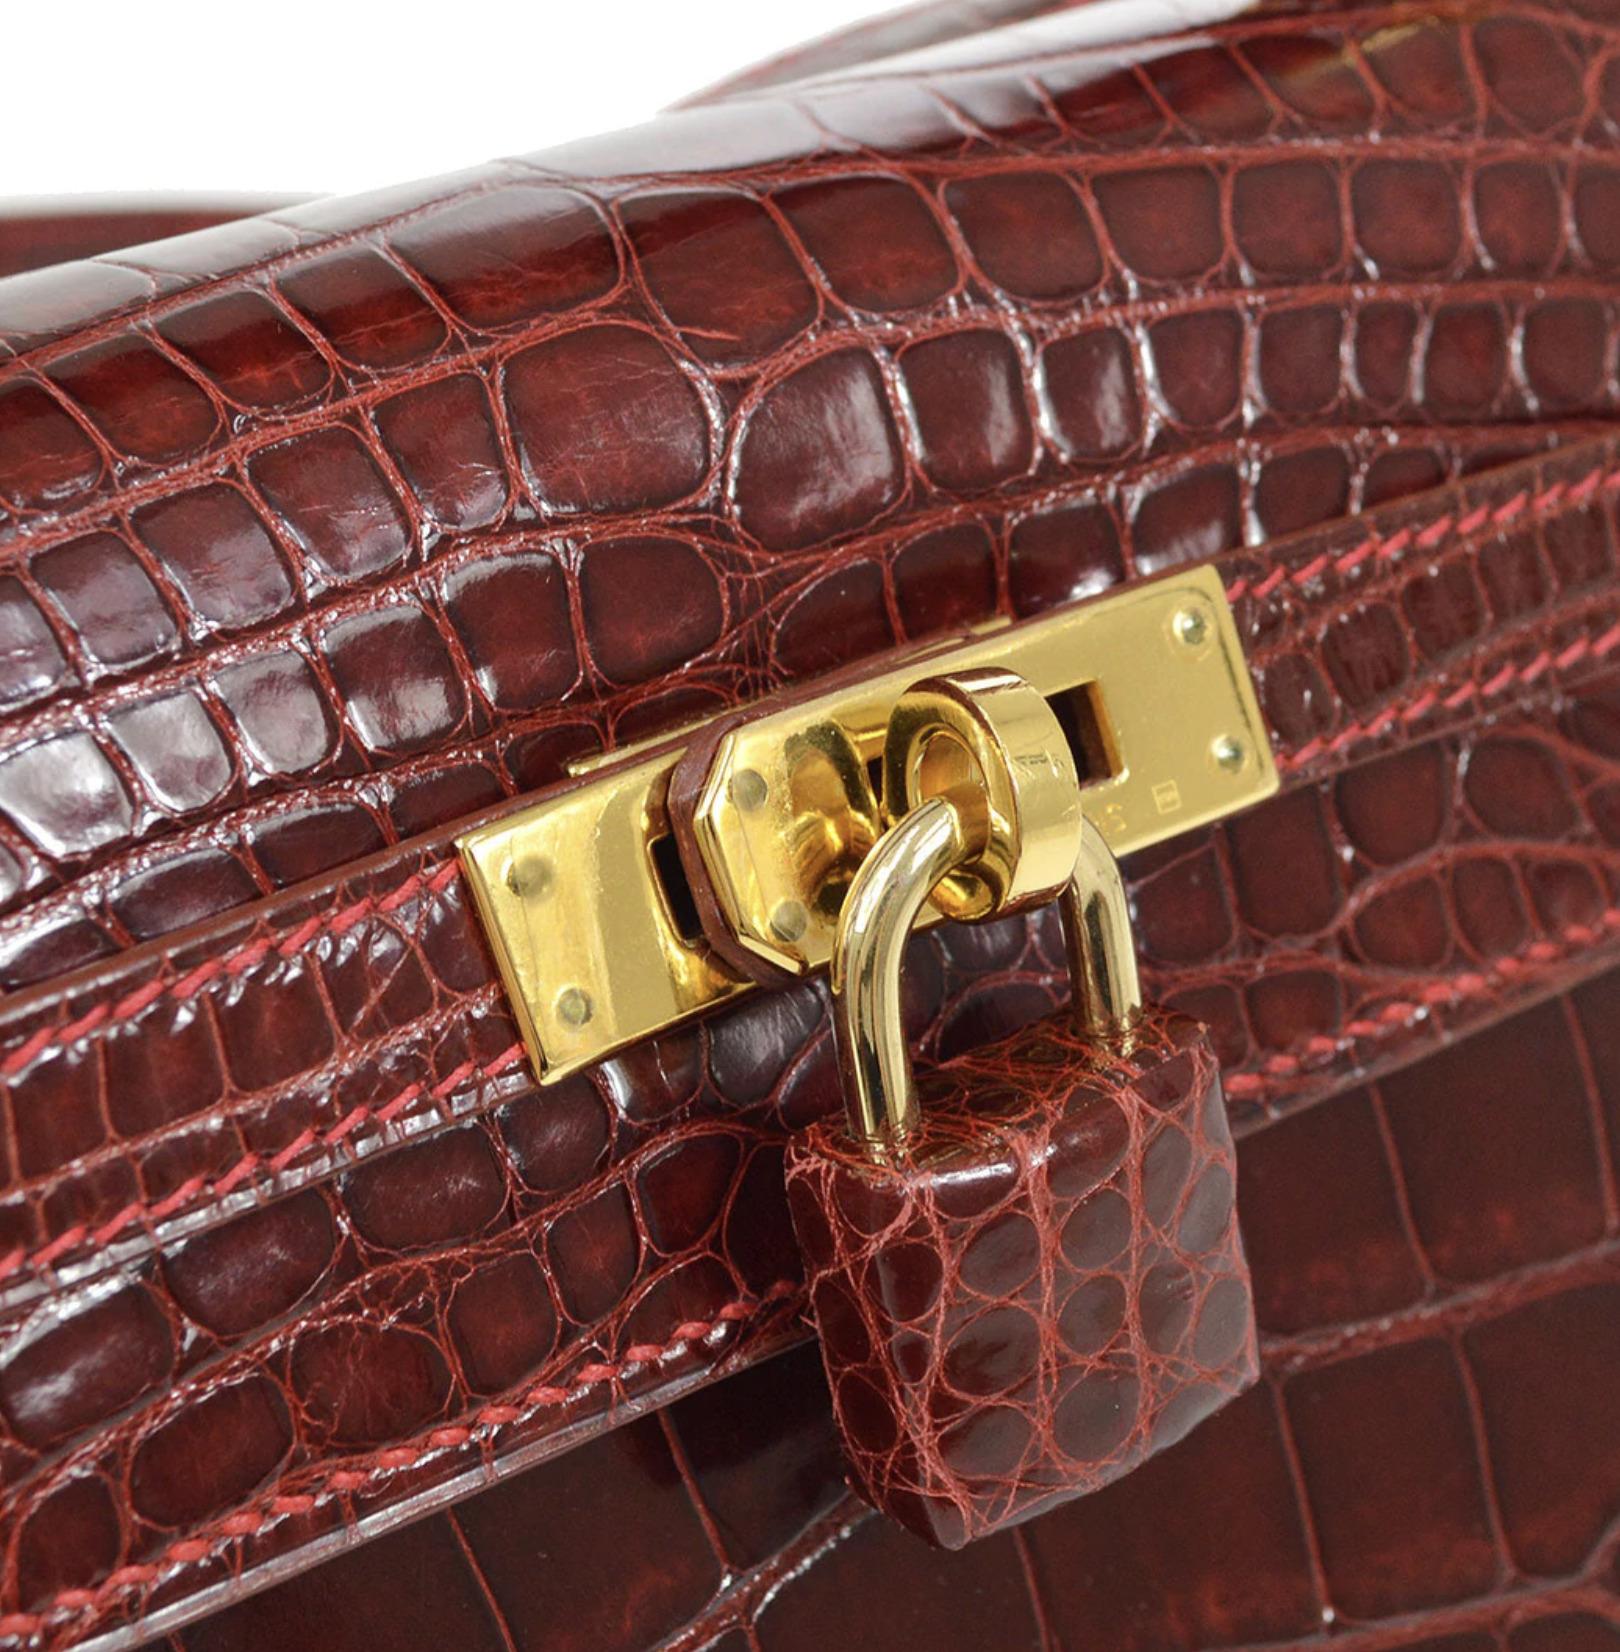 Pre-Owned Vintage Condition
From 2001 Collection
Rouge
Alligator
Gold Tone Hardware
Measures 9.75